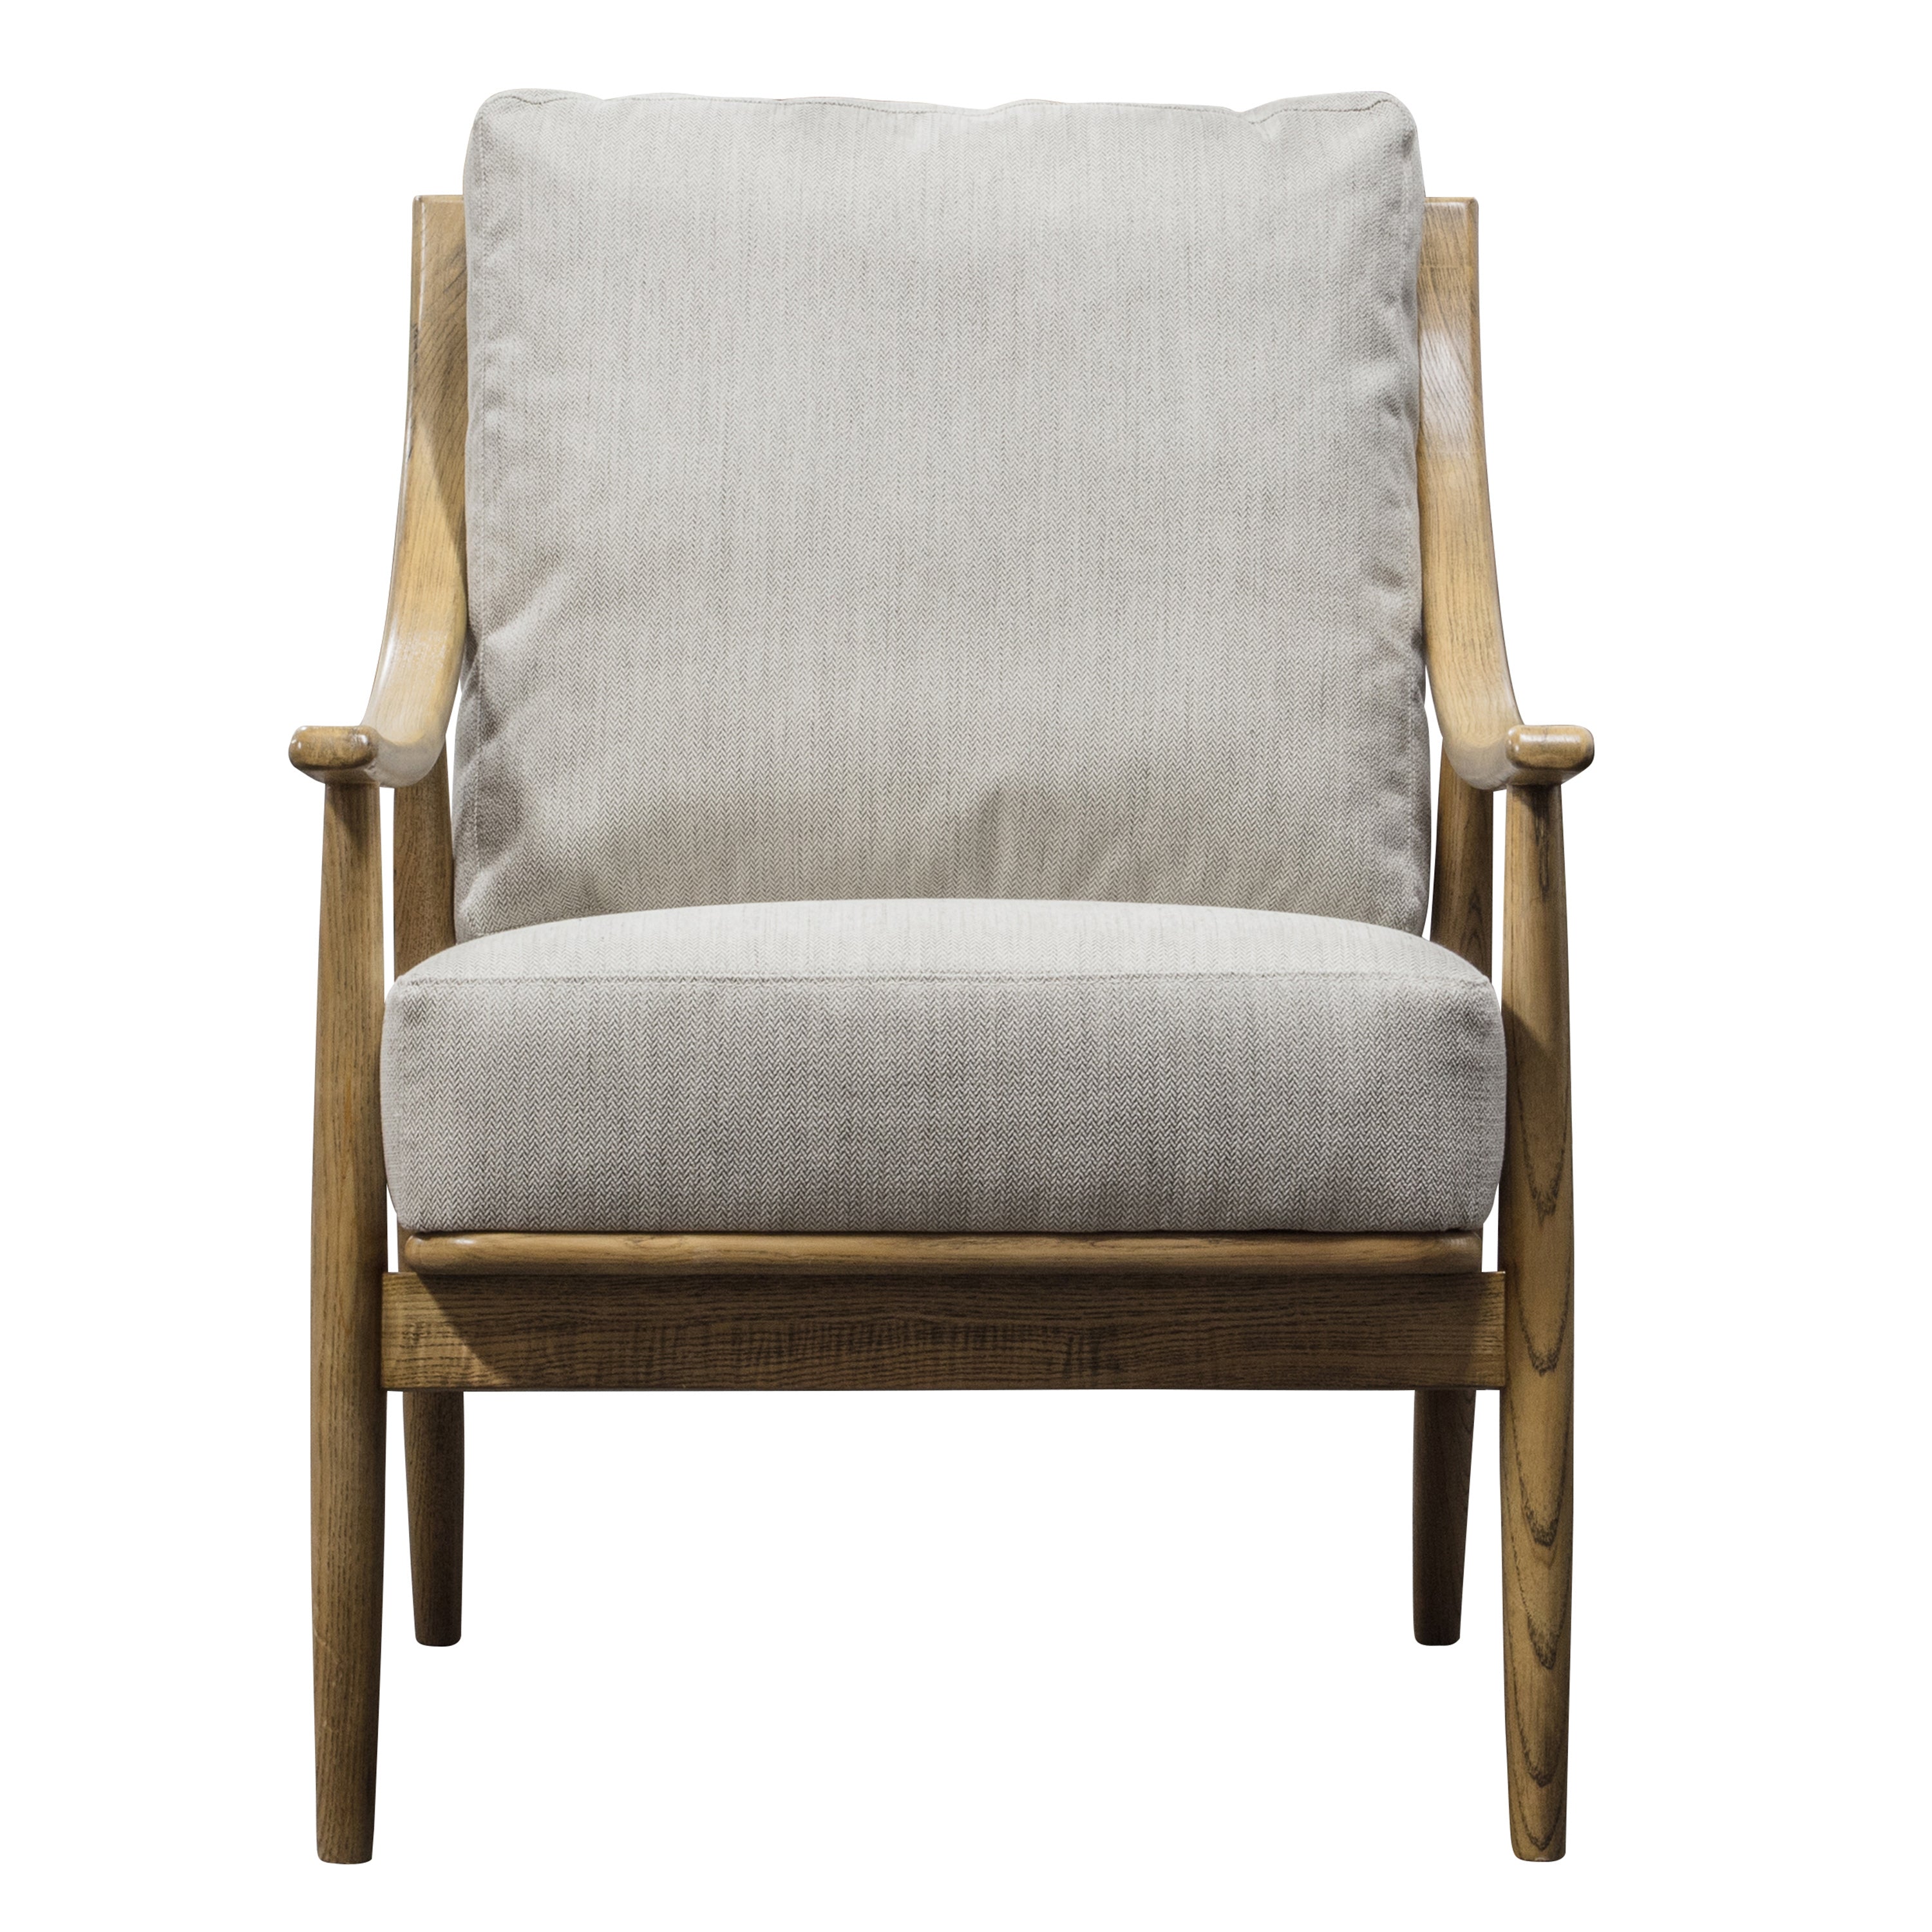 Porthcurnow Ash and Natural Linen Armchair